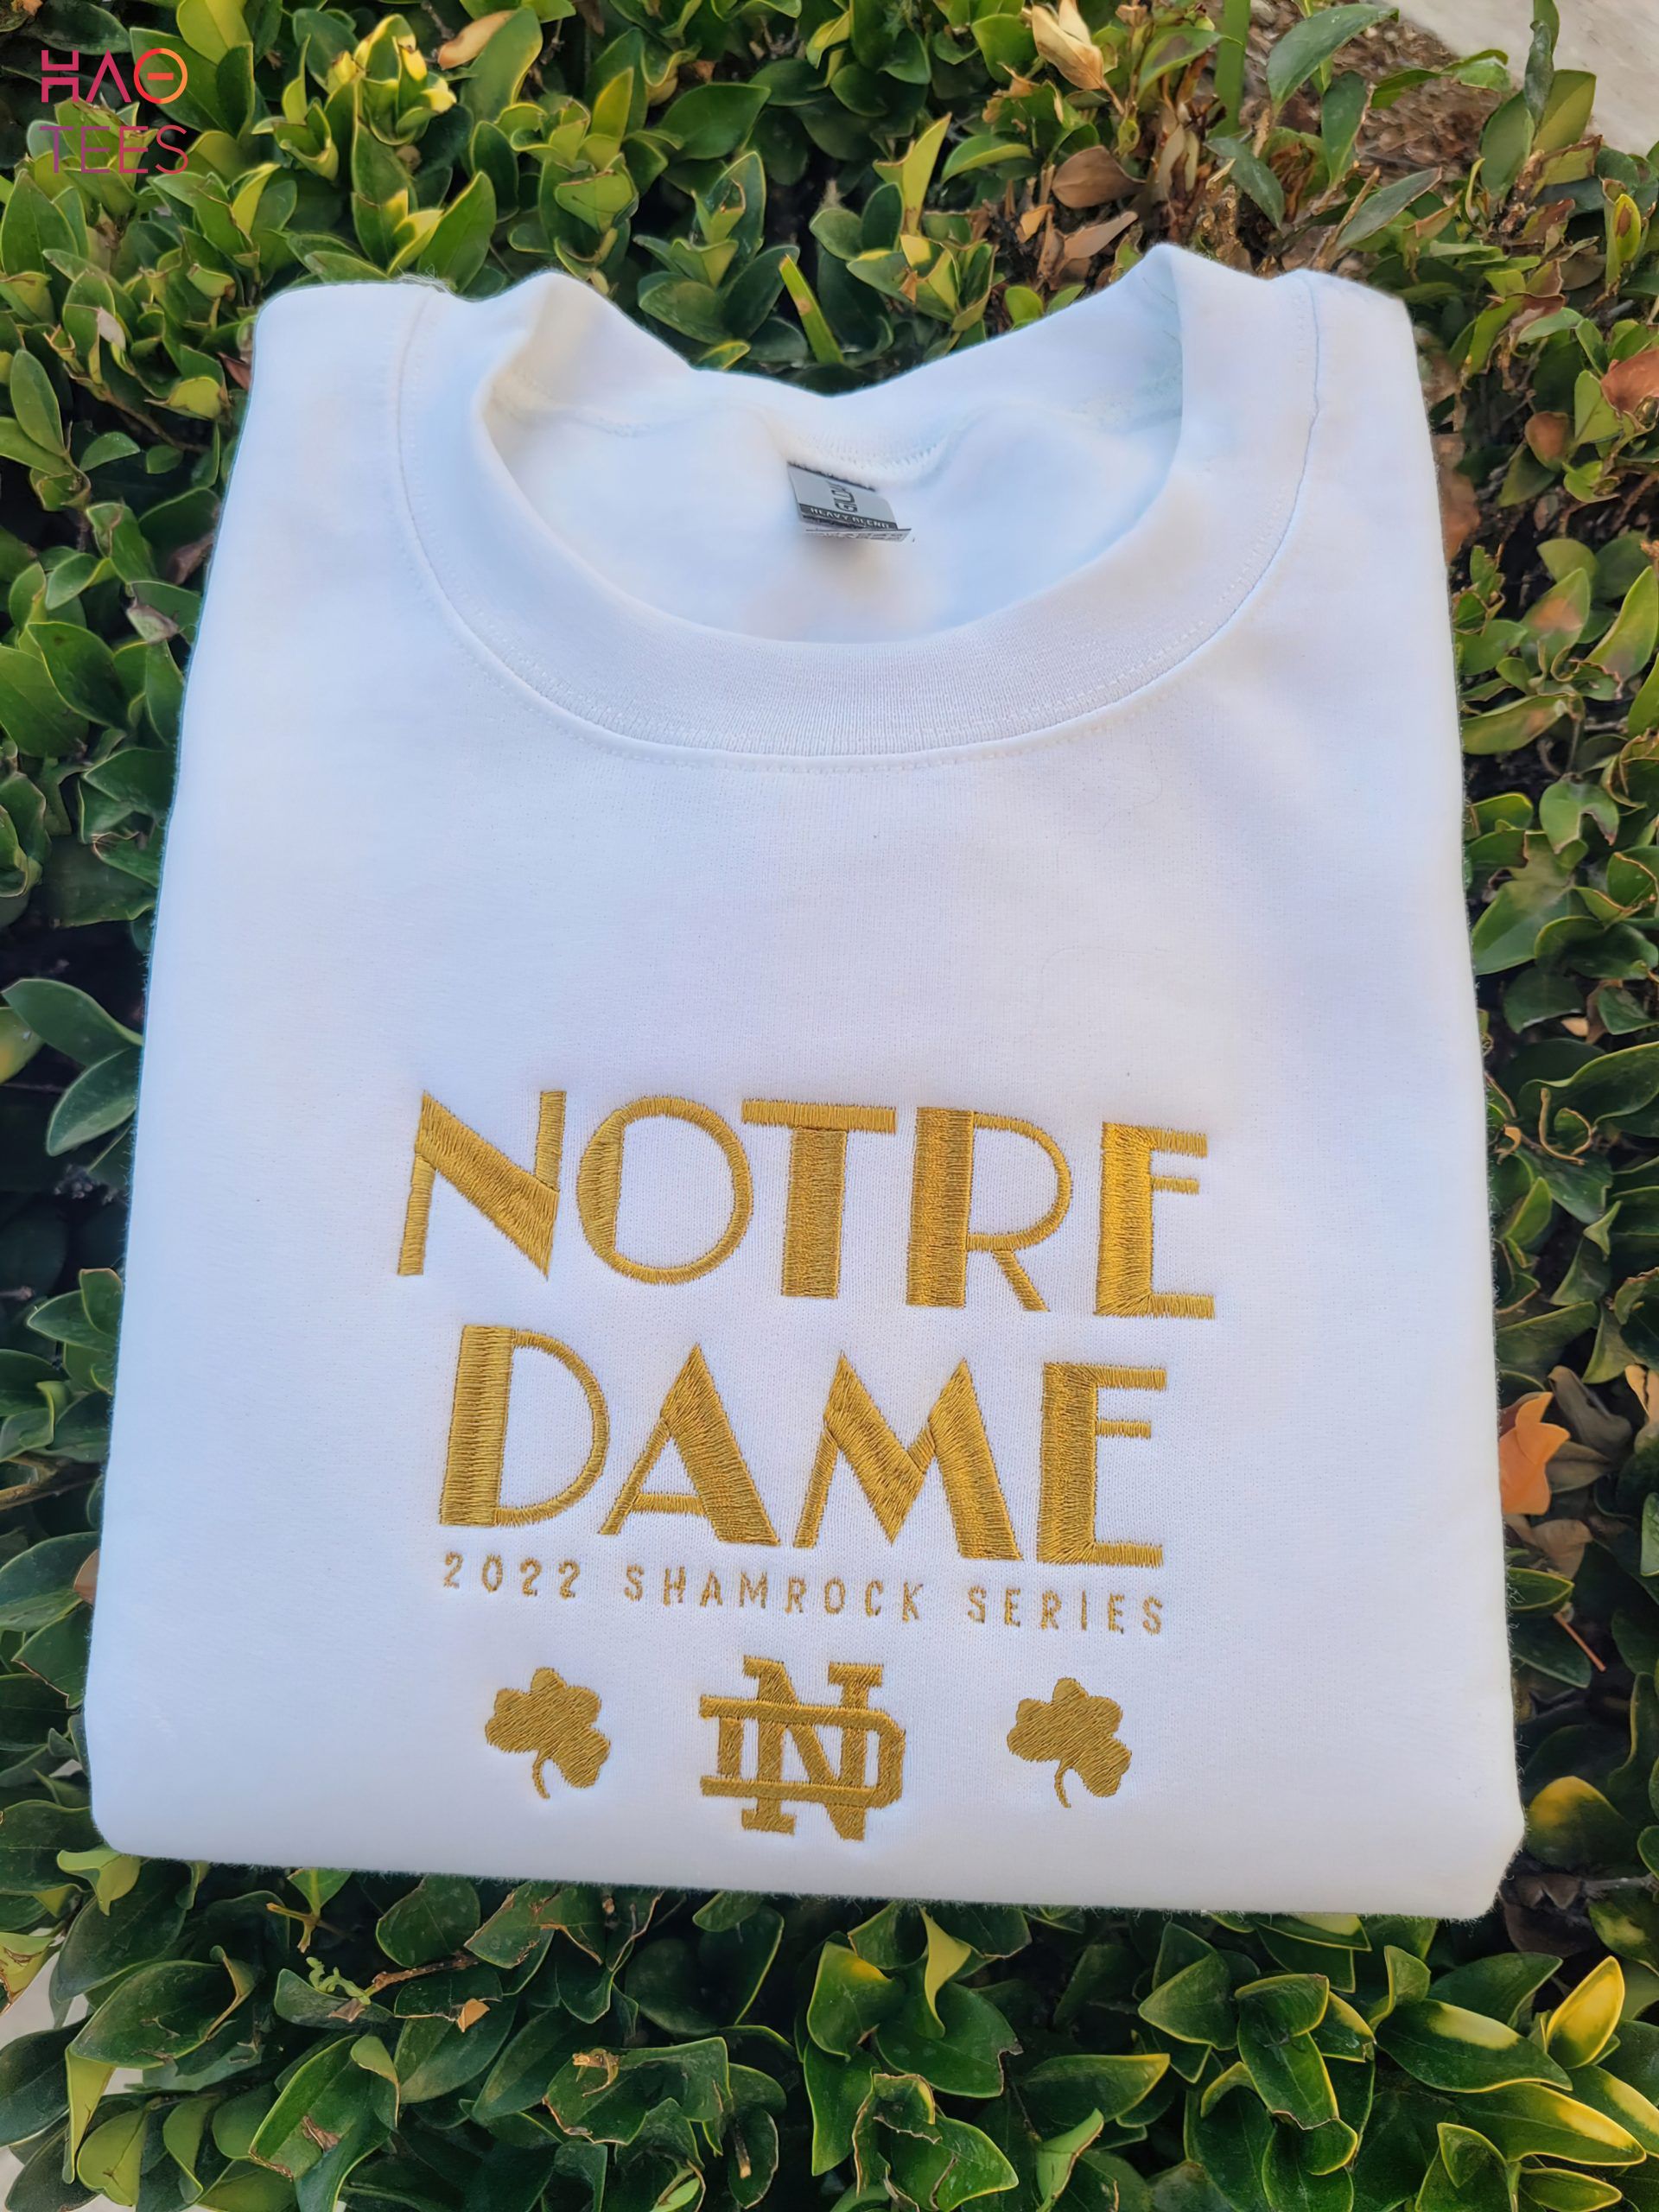 Notre Dame's Shamrock Series jerseys, T-shirts available at